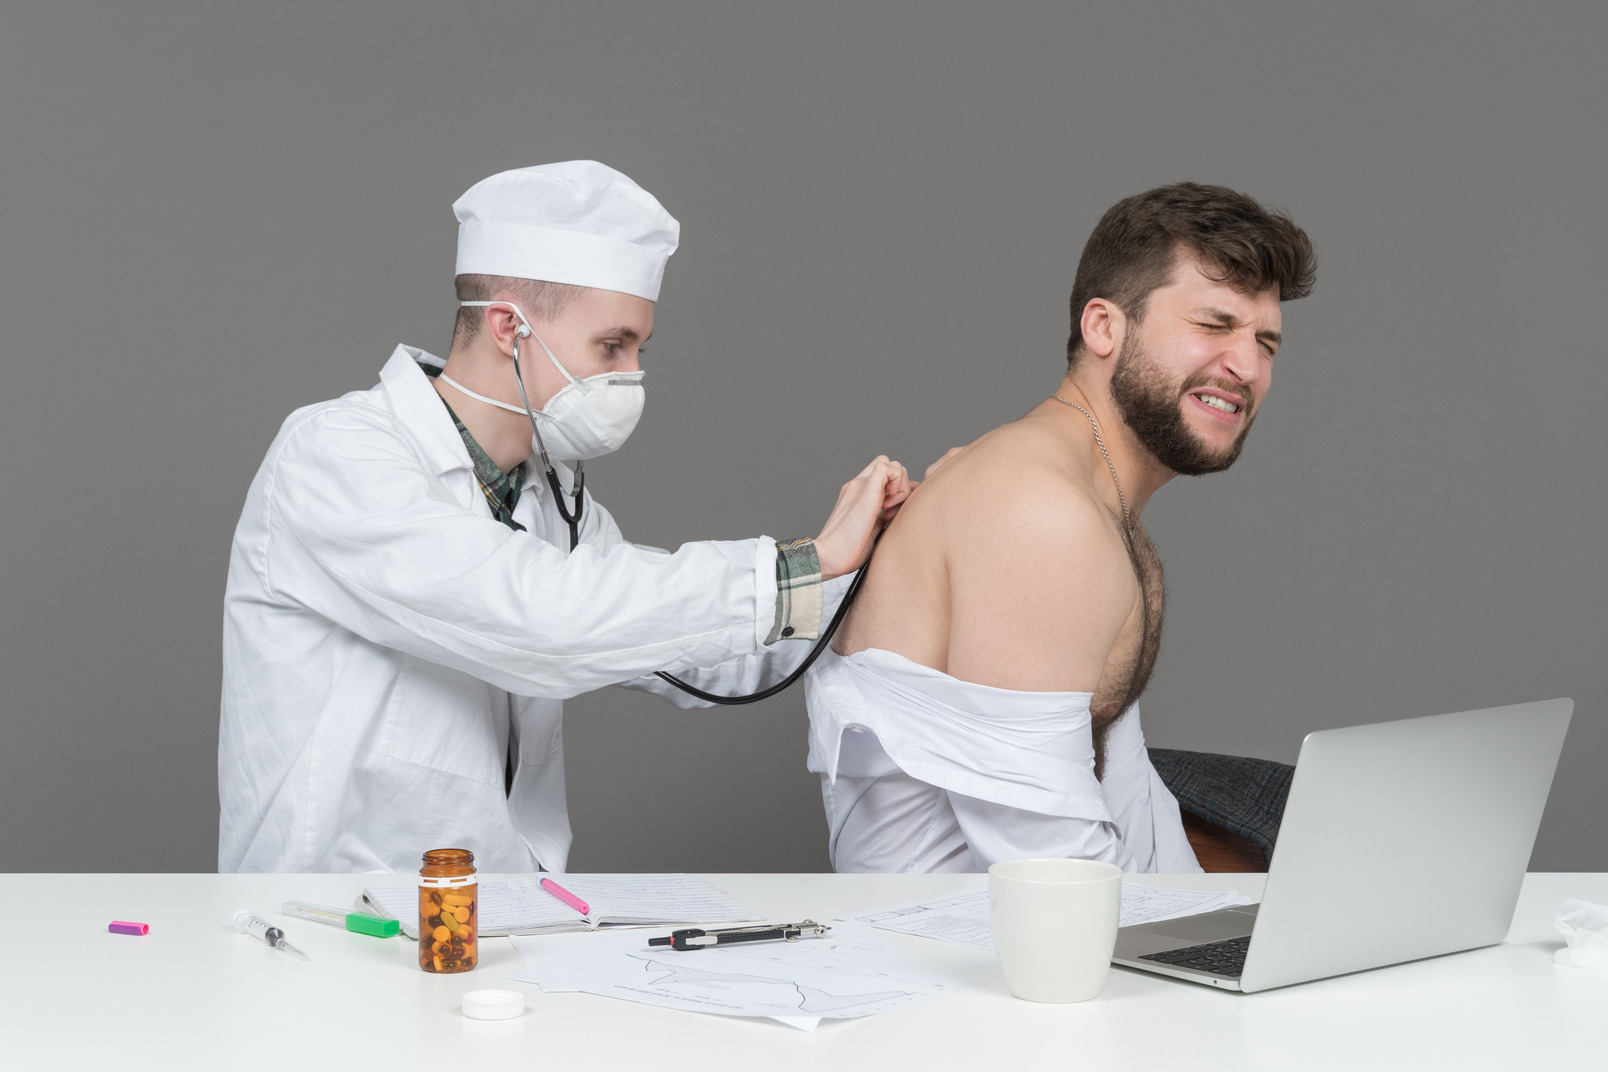 A doctor checking a patient